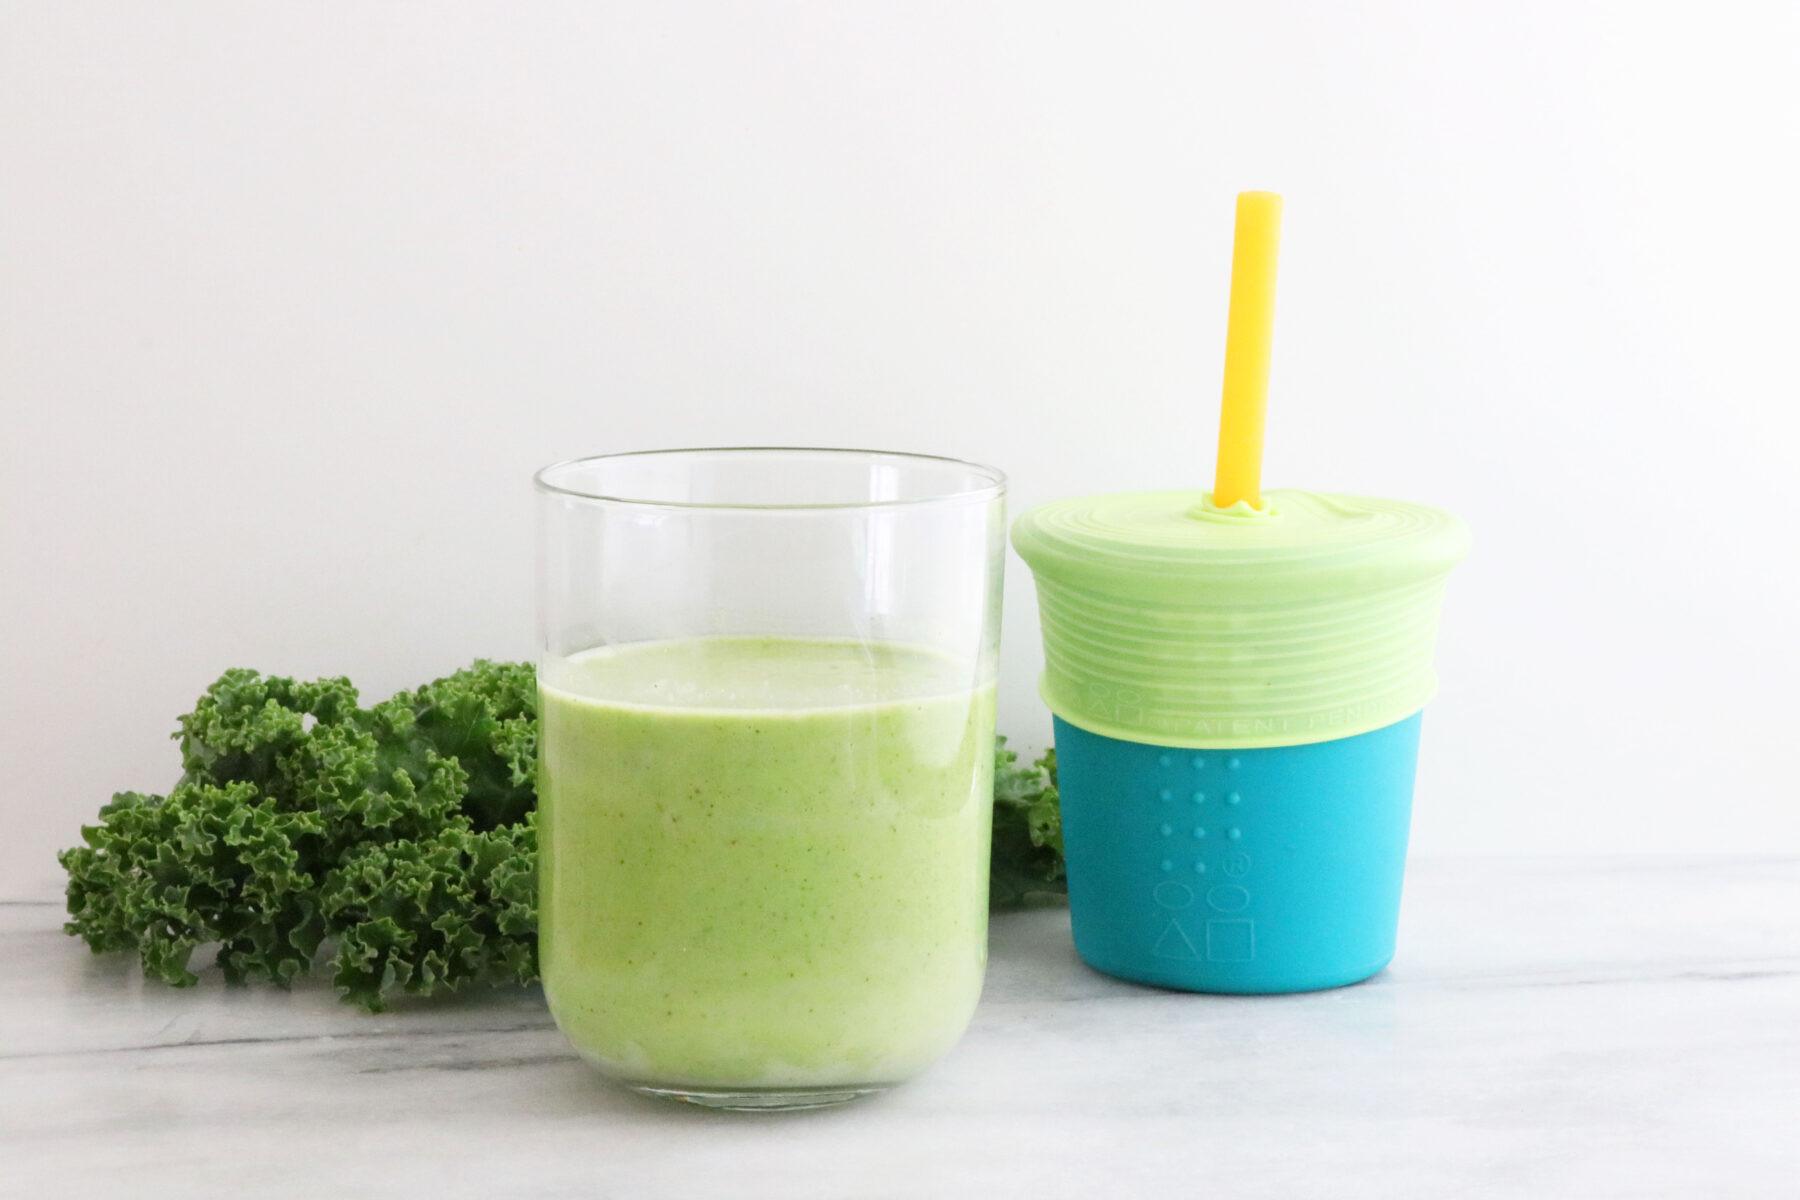 Kale on the left side, glass in the middle with smoothie and toddler cup on the right with smoothie and straw.